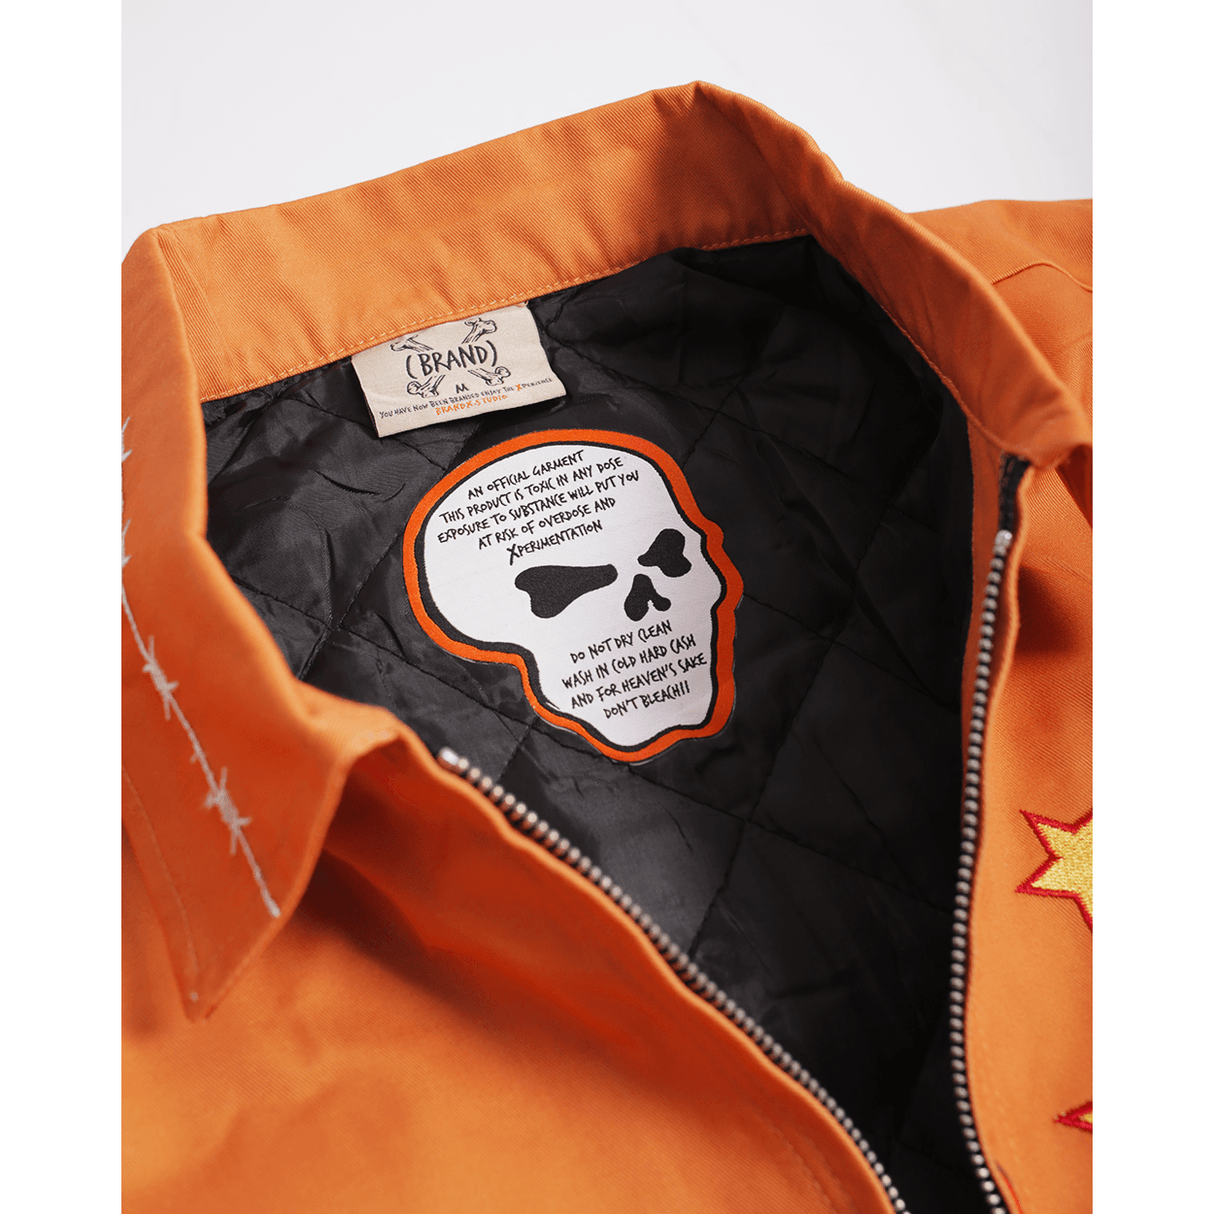 BRAND X ITS HOT IN THE VALLEY WORK YOUTH JACKET - Allstarelite.com